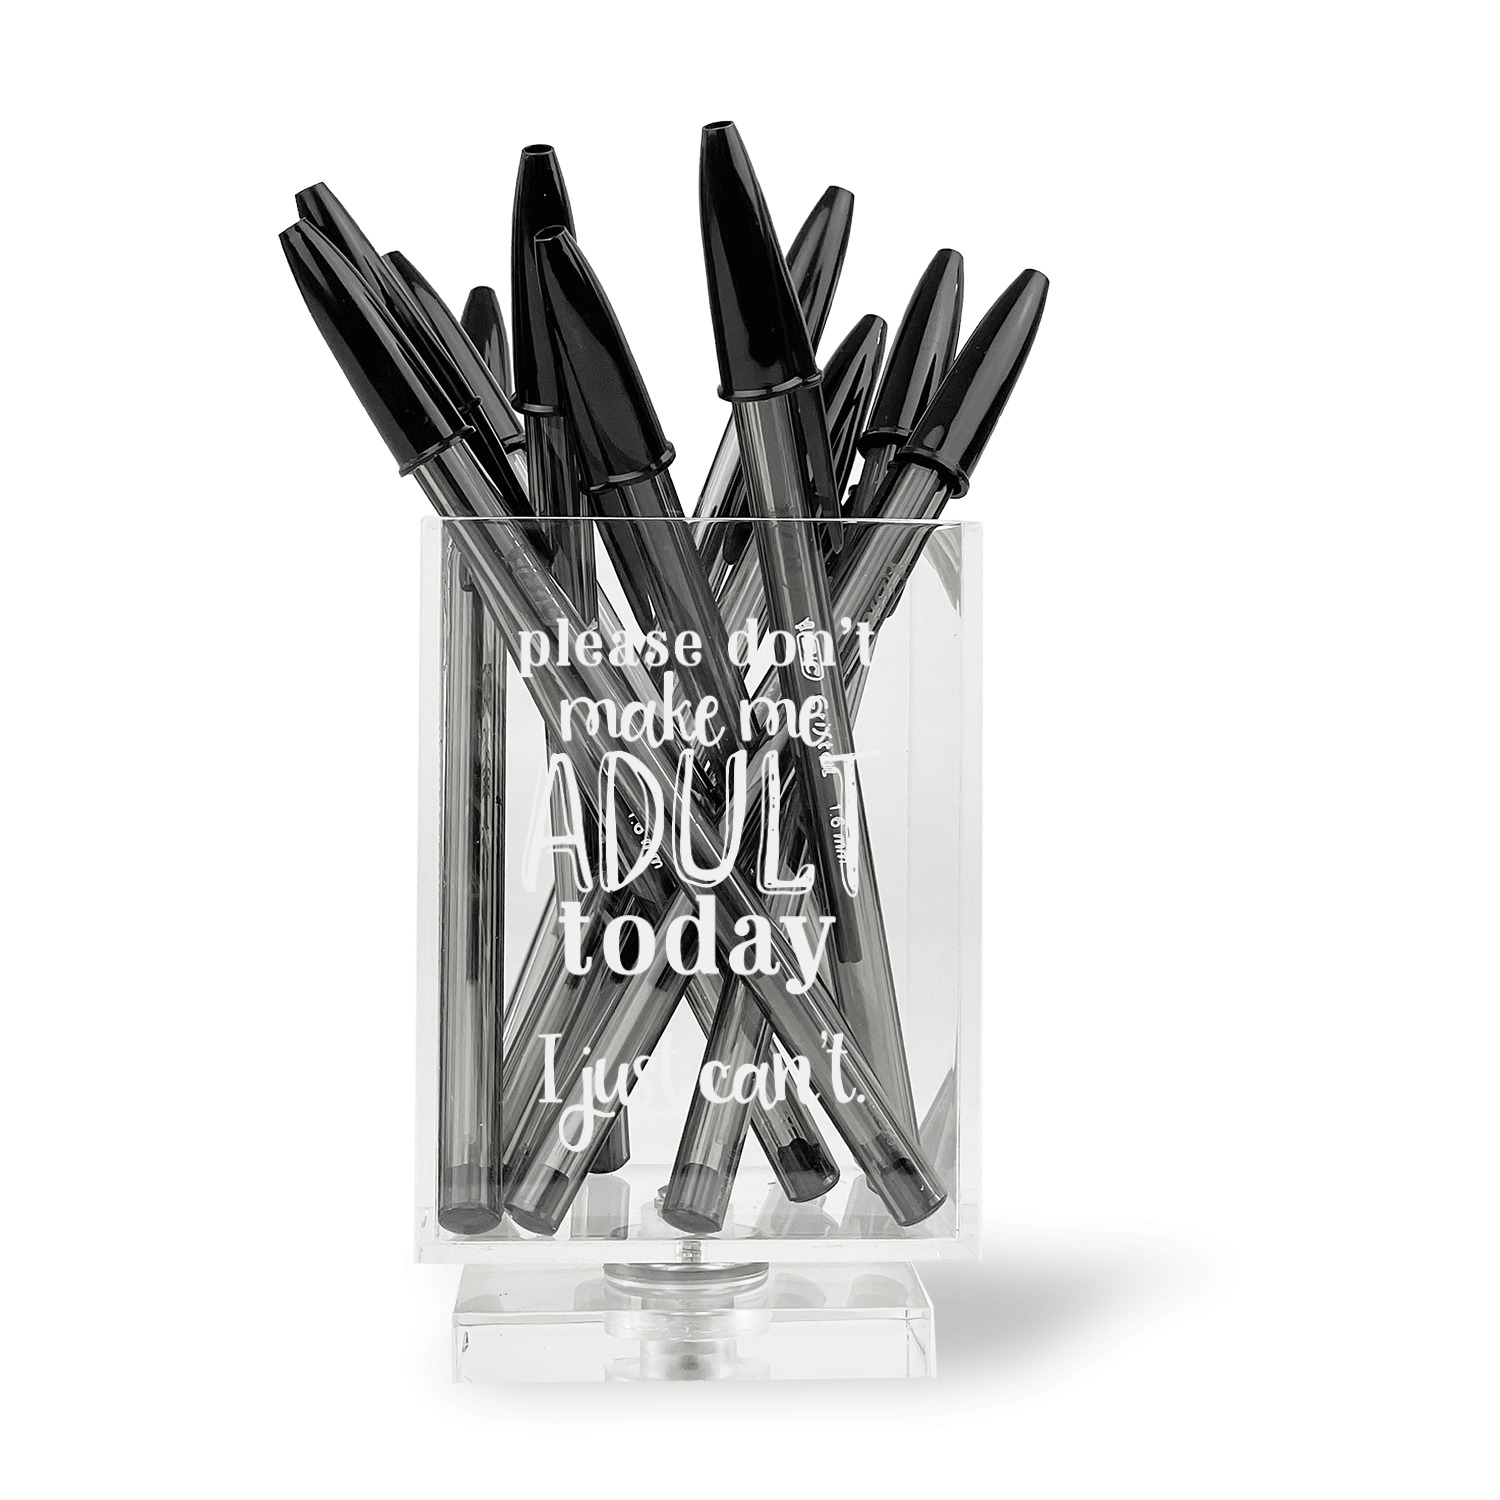 Funny Quotes and Sayings Design Custom Acrylic Pen Holder